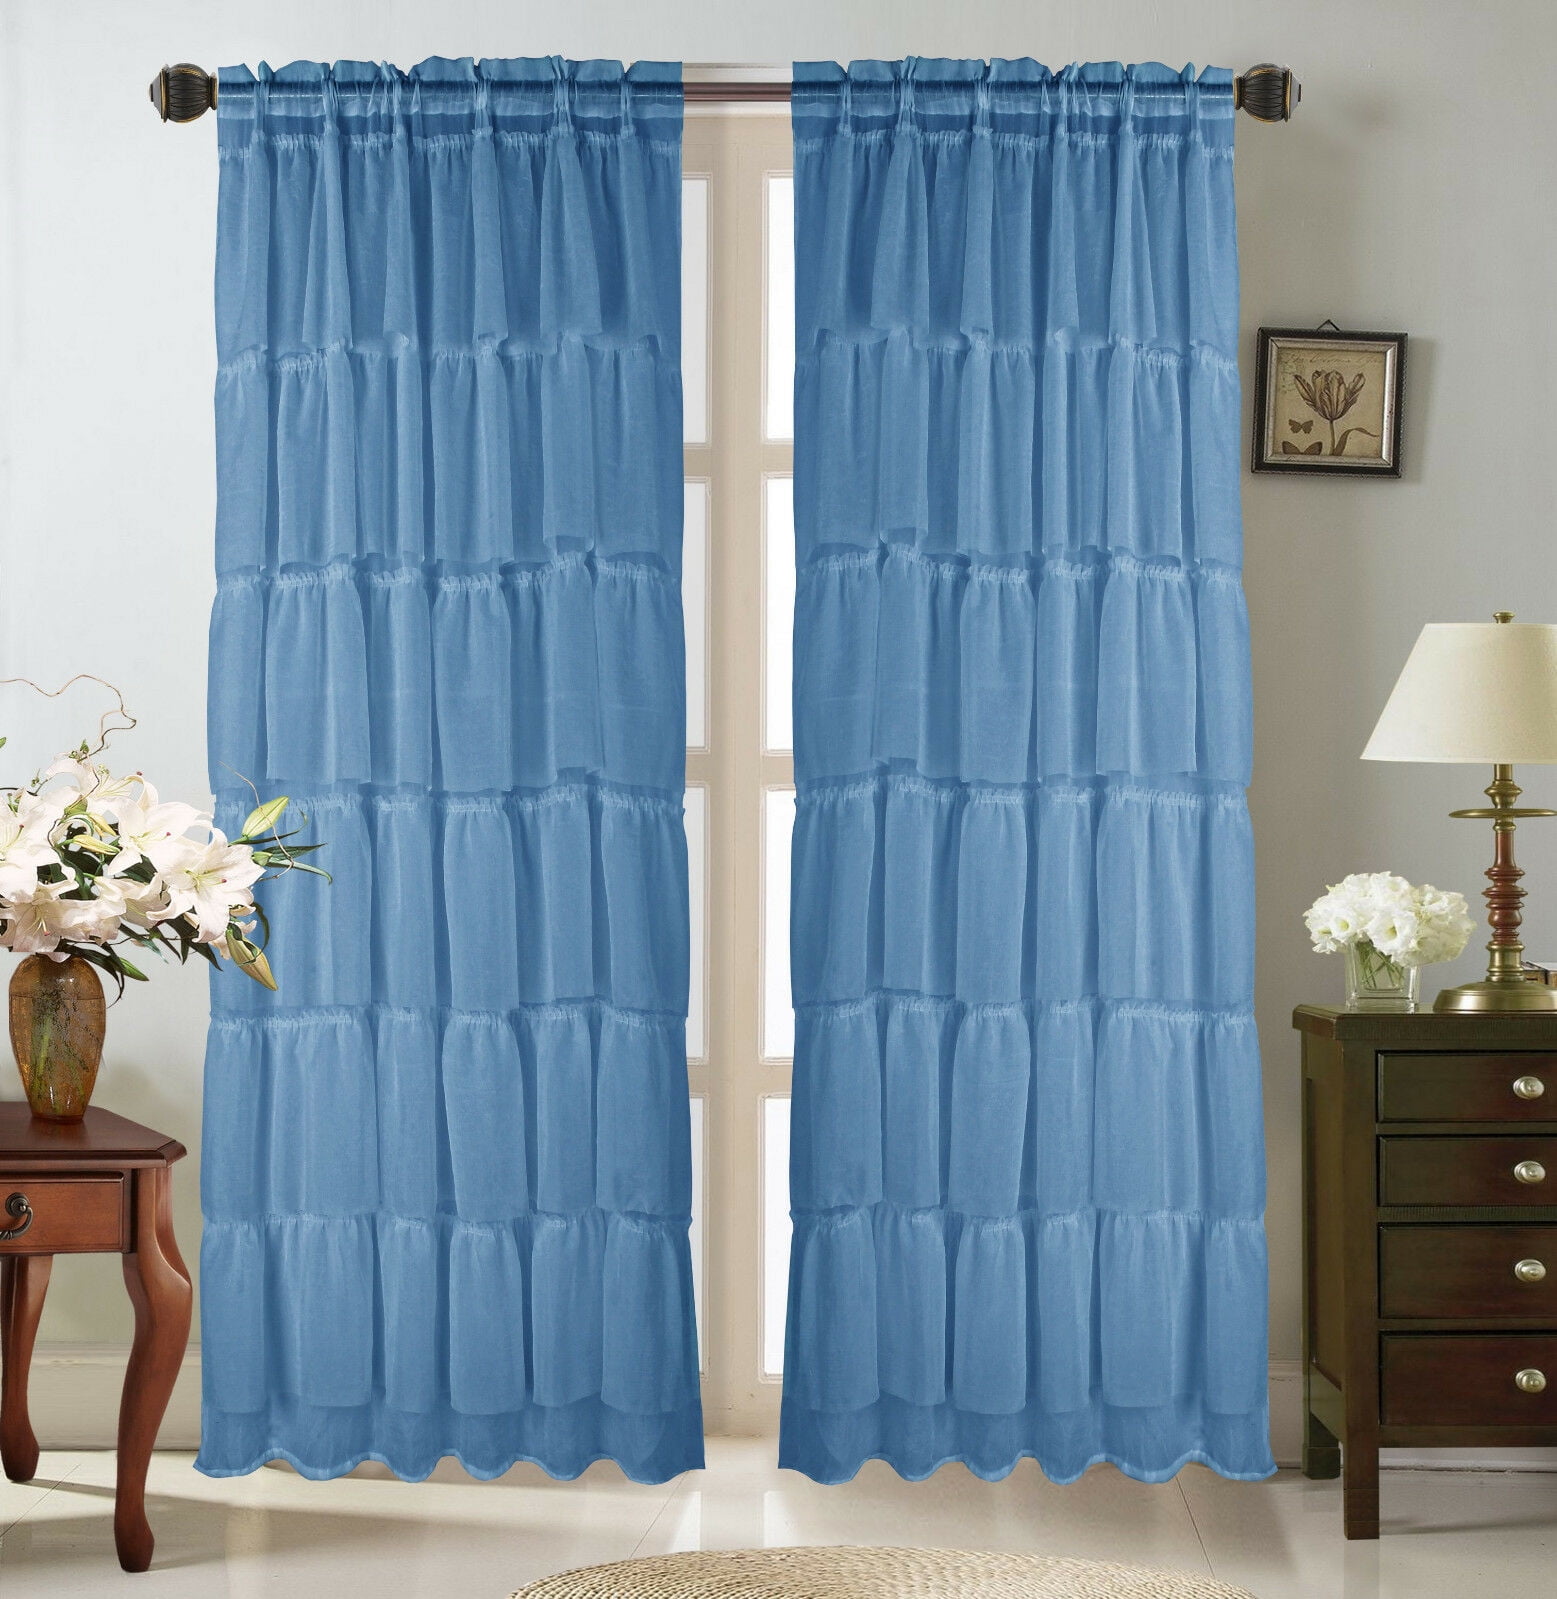 1PC VOILE SHEER CRUSHED RUFFLE WINDOW DRESSING CURTAIN PANEL DRAPE TEAL BLUE 